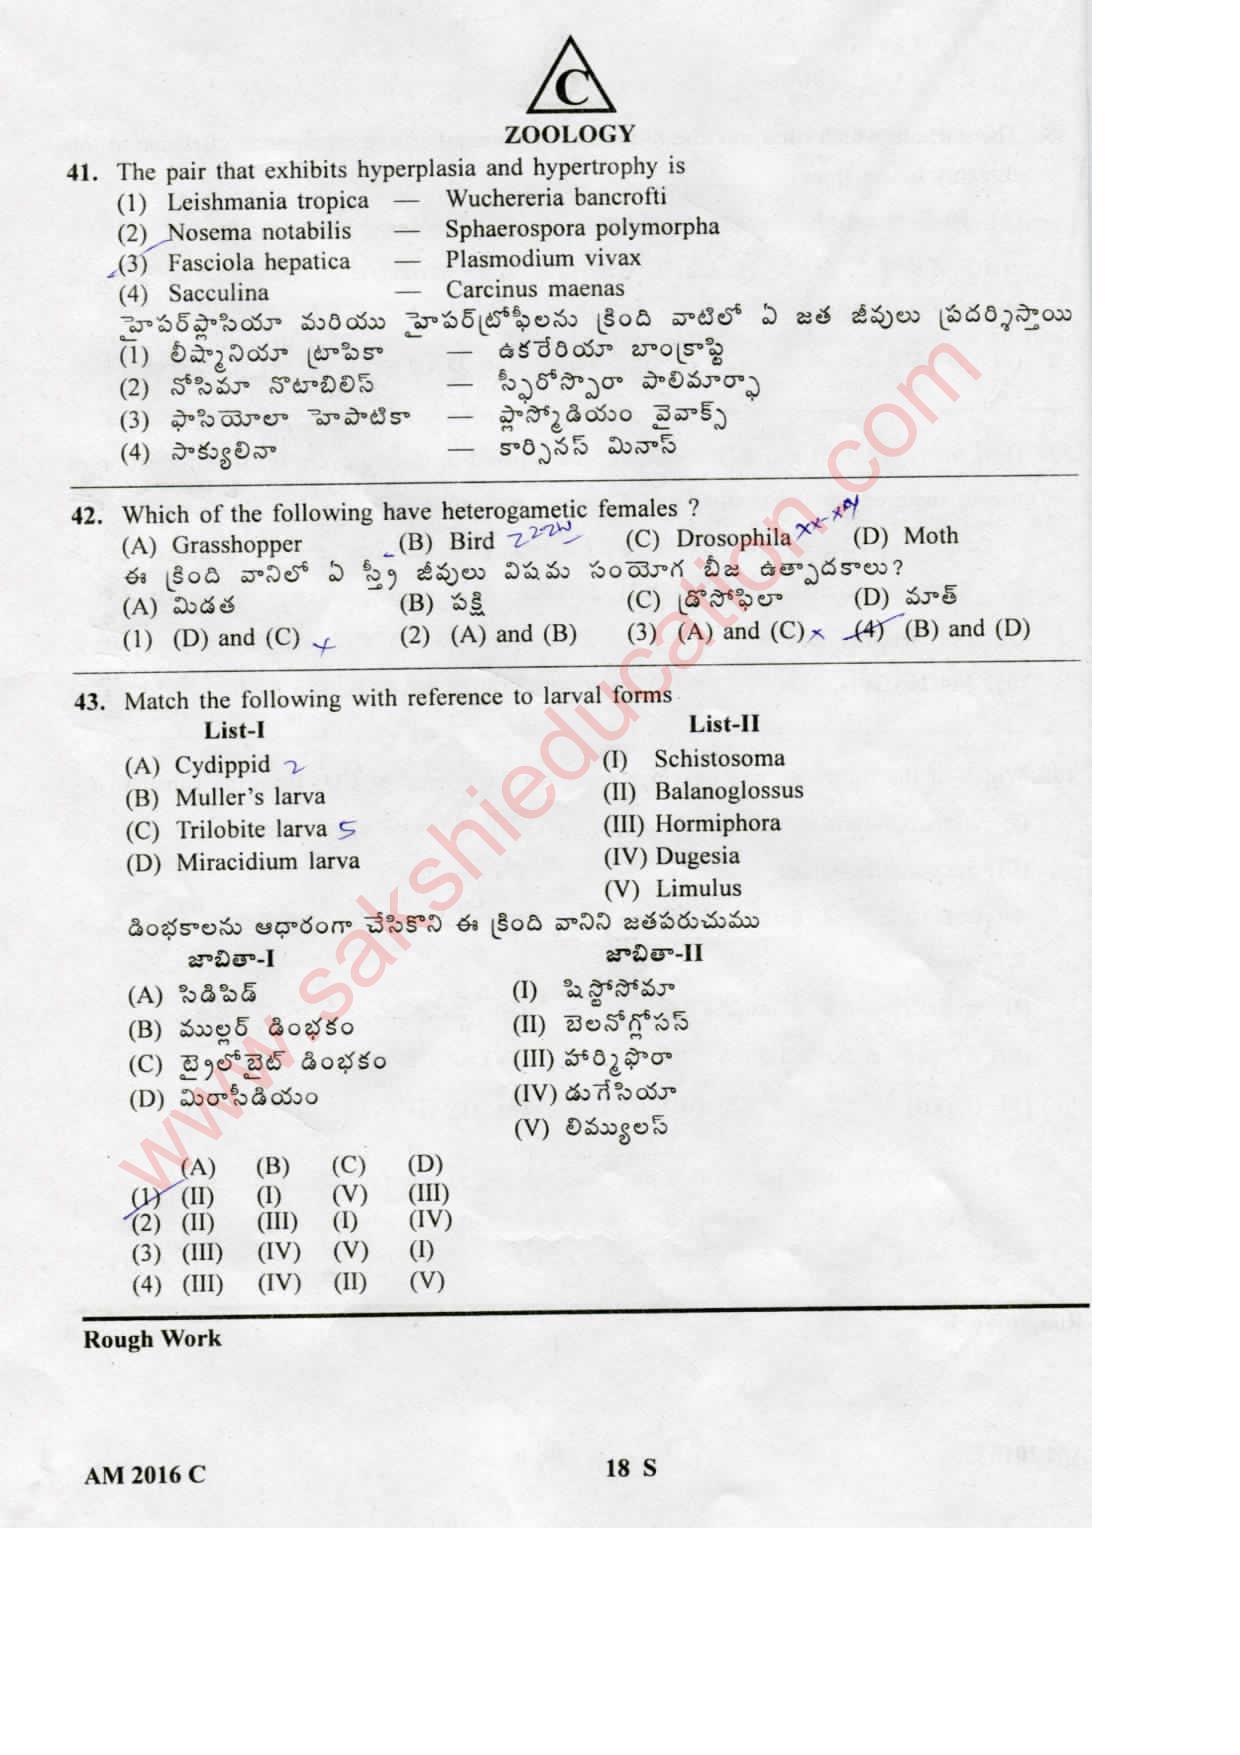 TS EAMCET 2016 Medical Question Paper with Key (Held on 15 May 2016) - Page 18